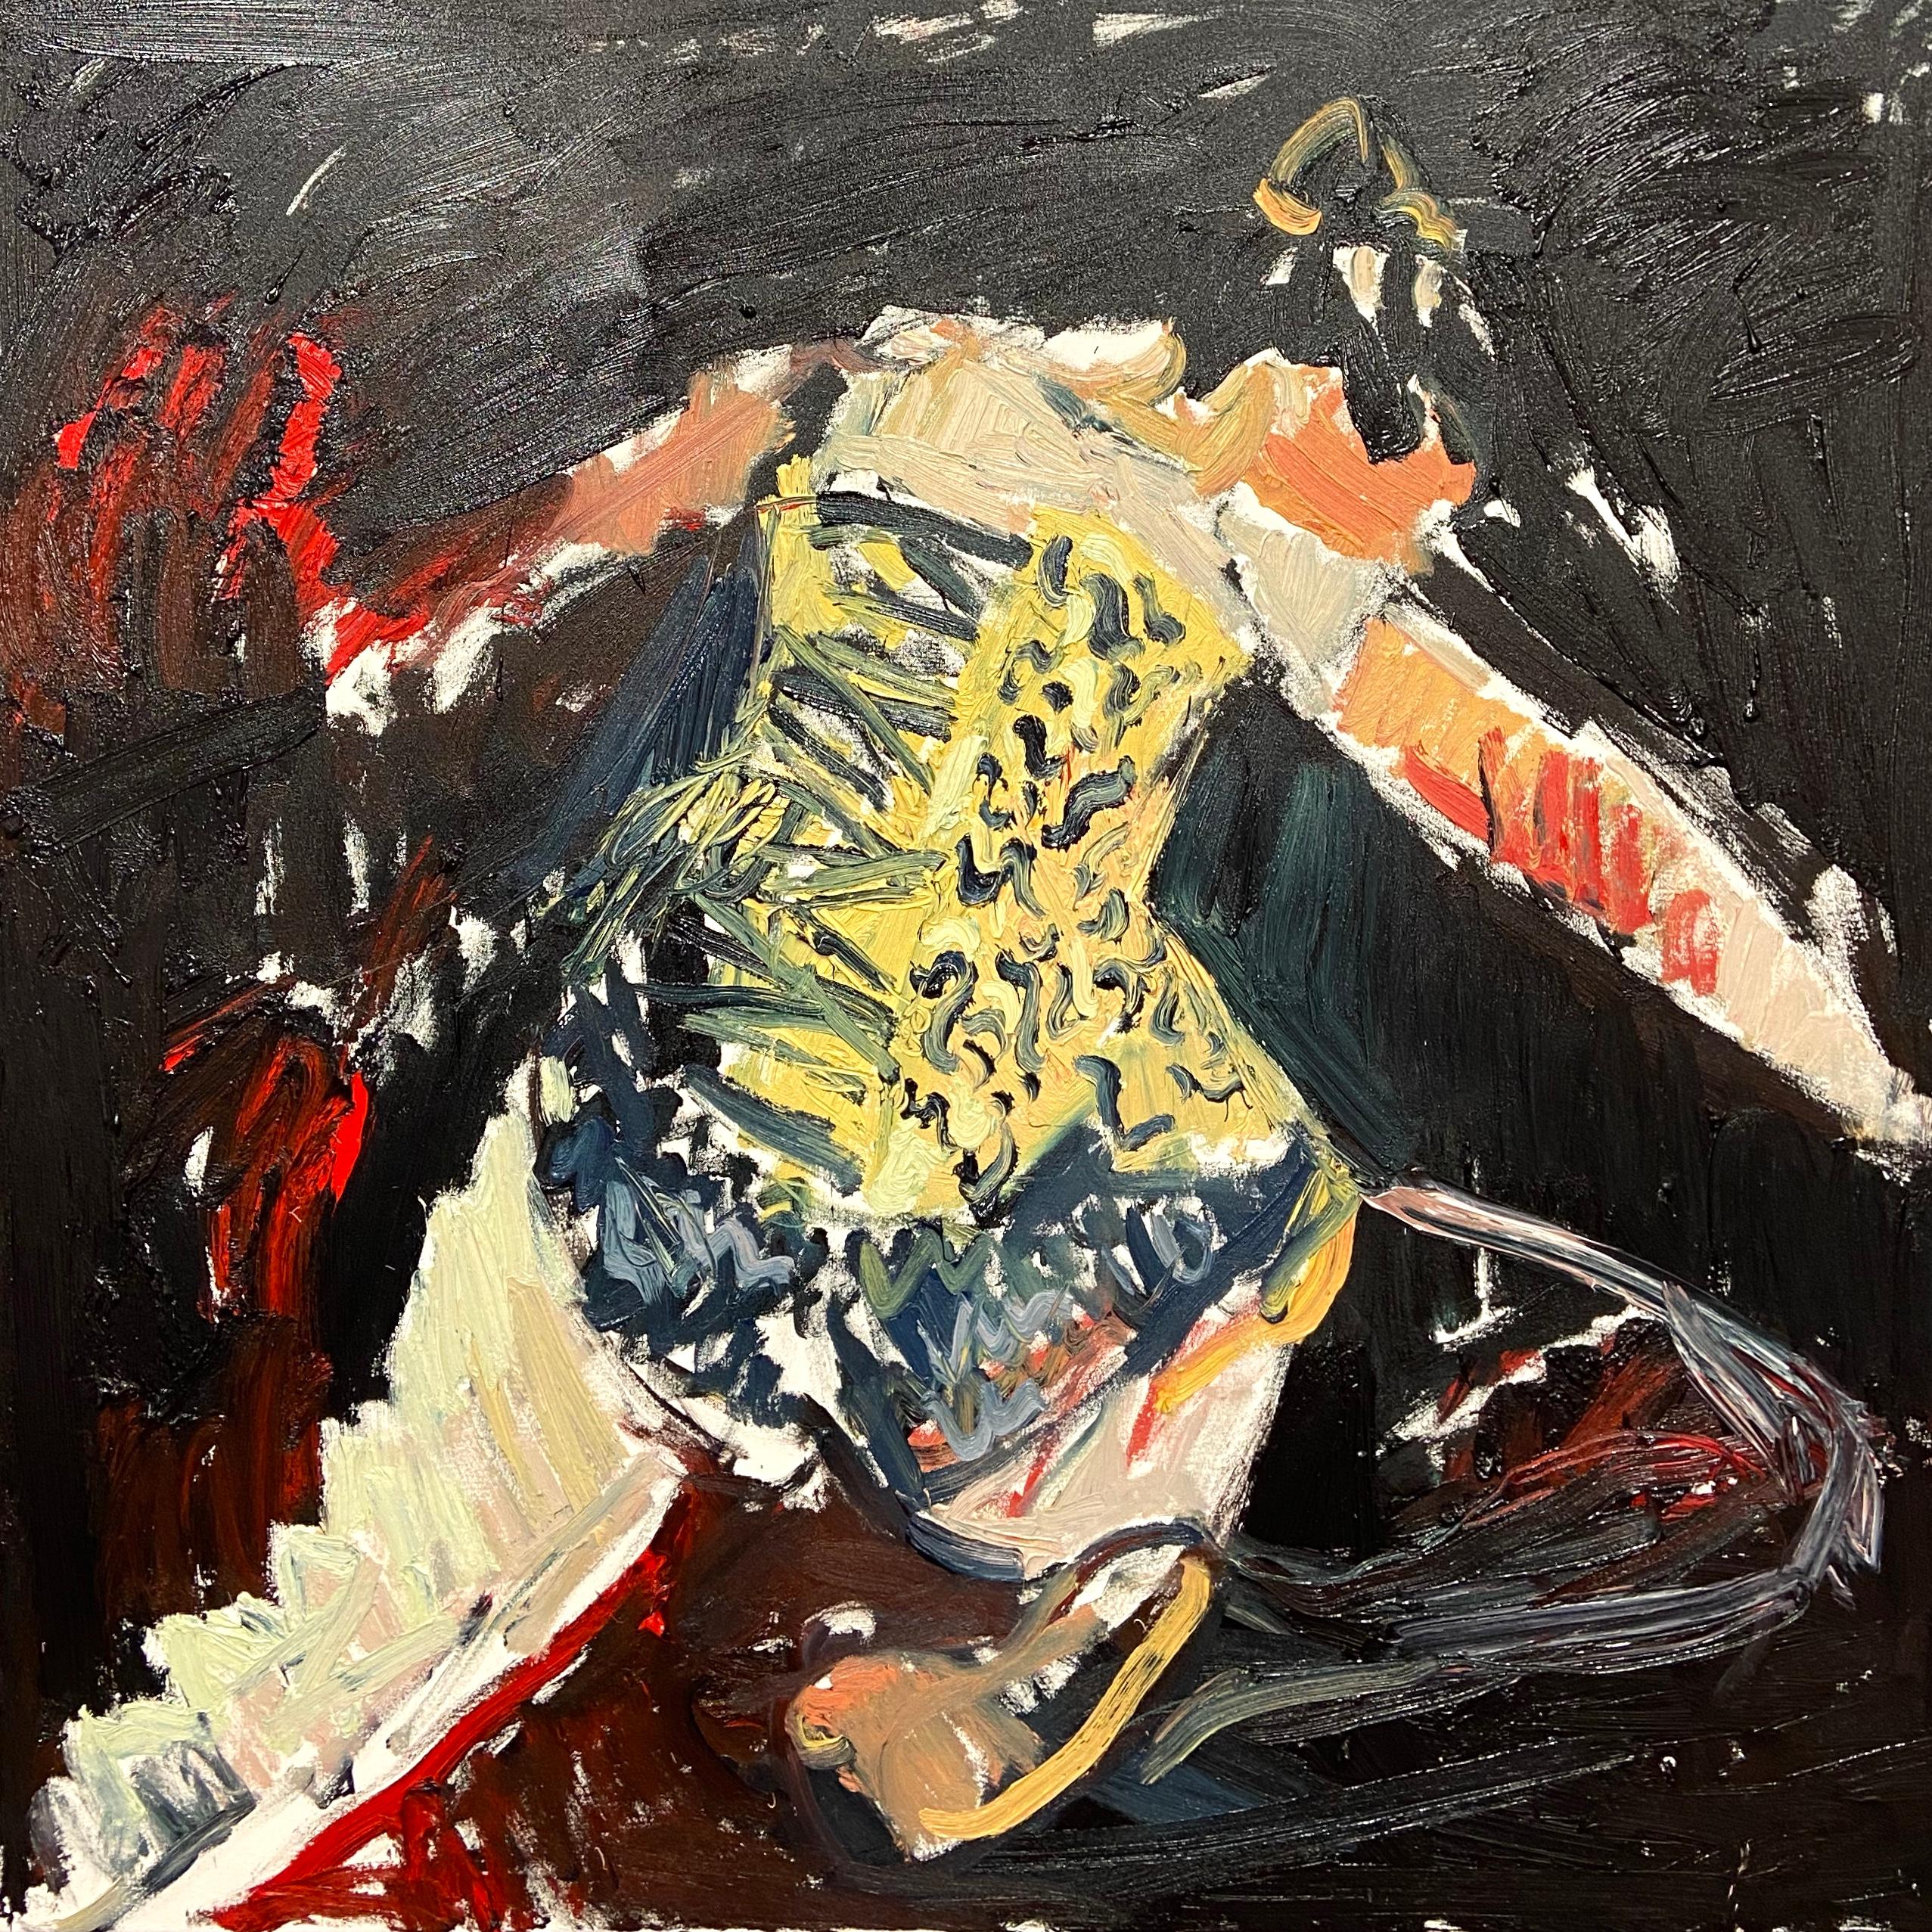 Paul wadsworth Abstract Painting - "Golden Corset". Contemporary Abstract Expressionist Oil Painting